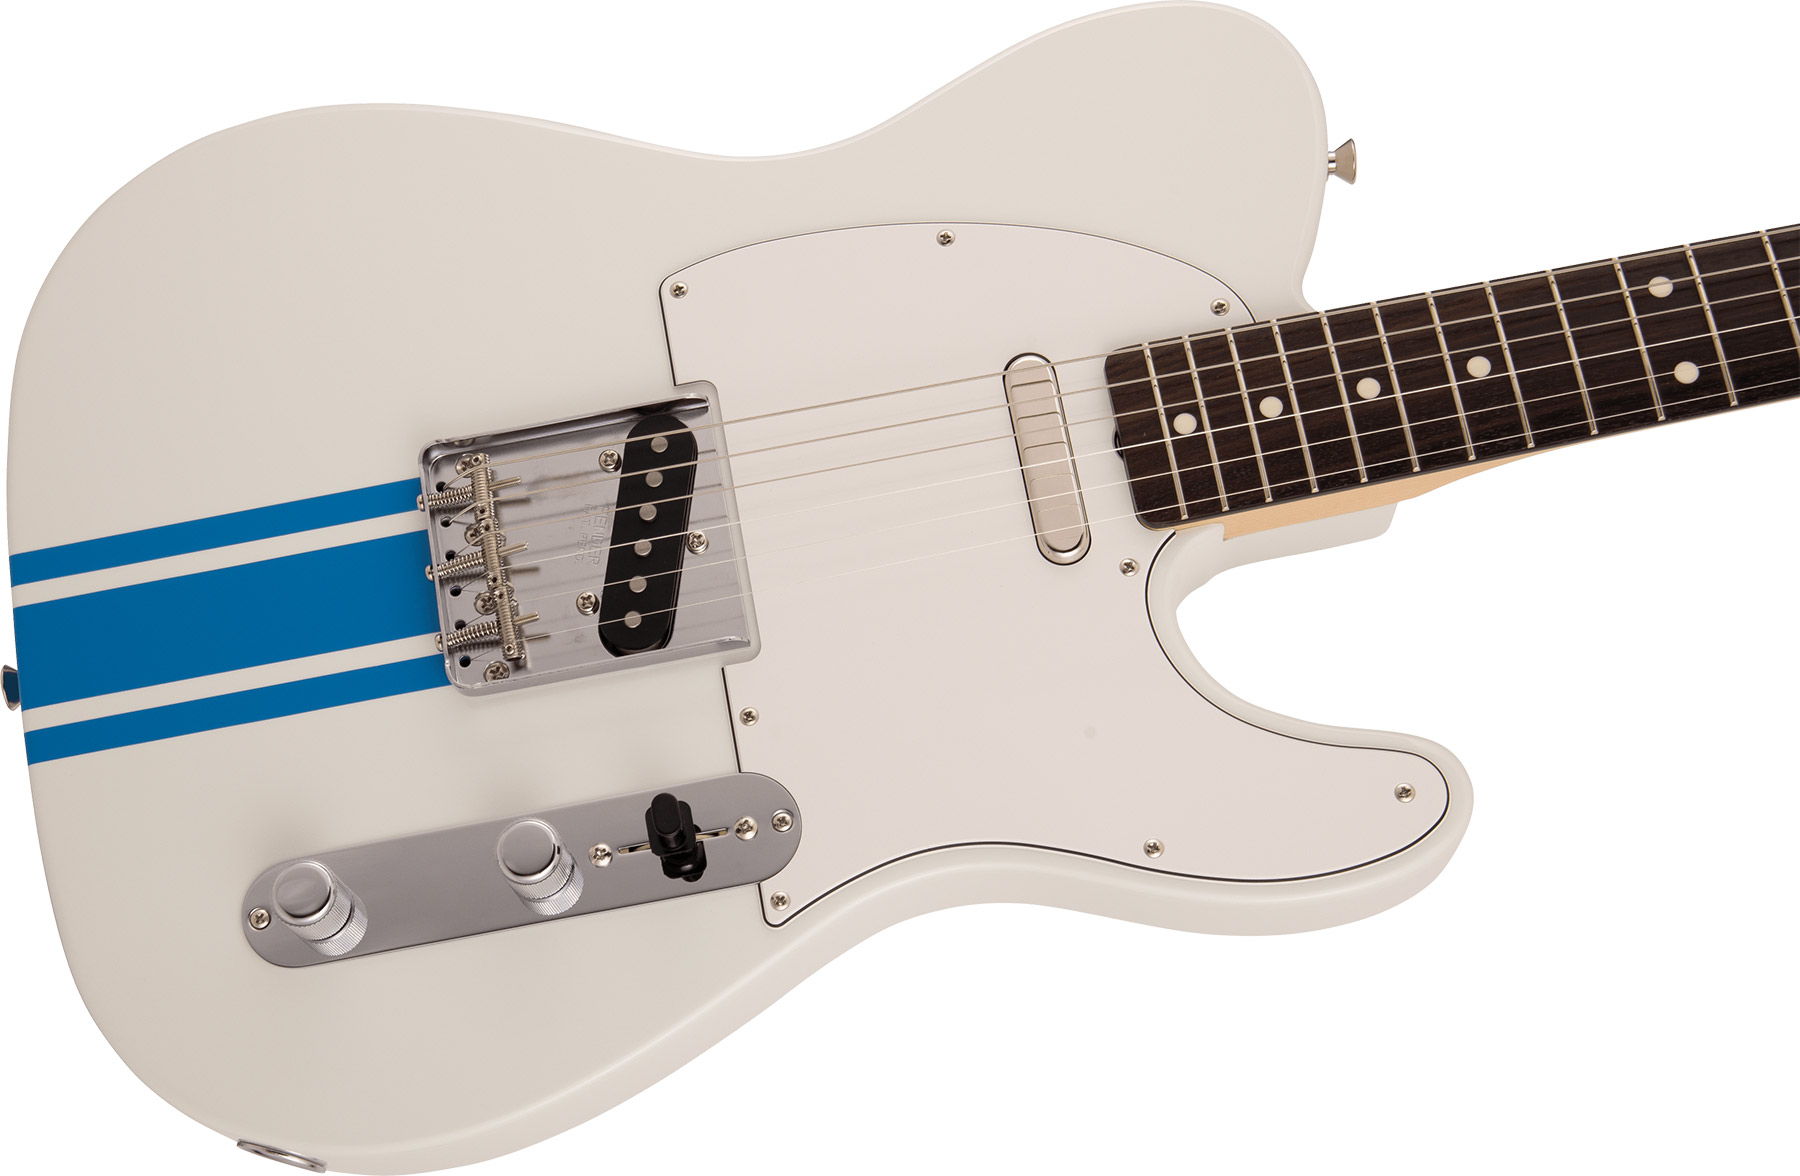 Fender Tele Traditional 60s Mij Jap 2s Ht Rw - Olympic White W/ Blue Competition Stripe - Tel shape electric guitar - Variation 2